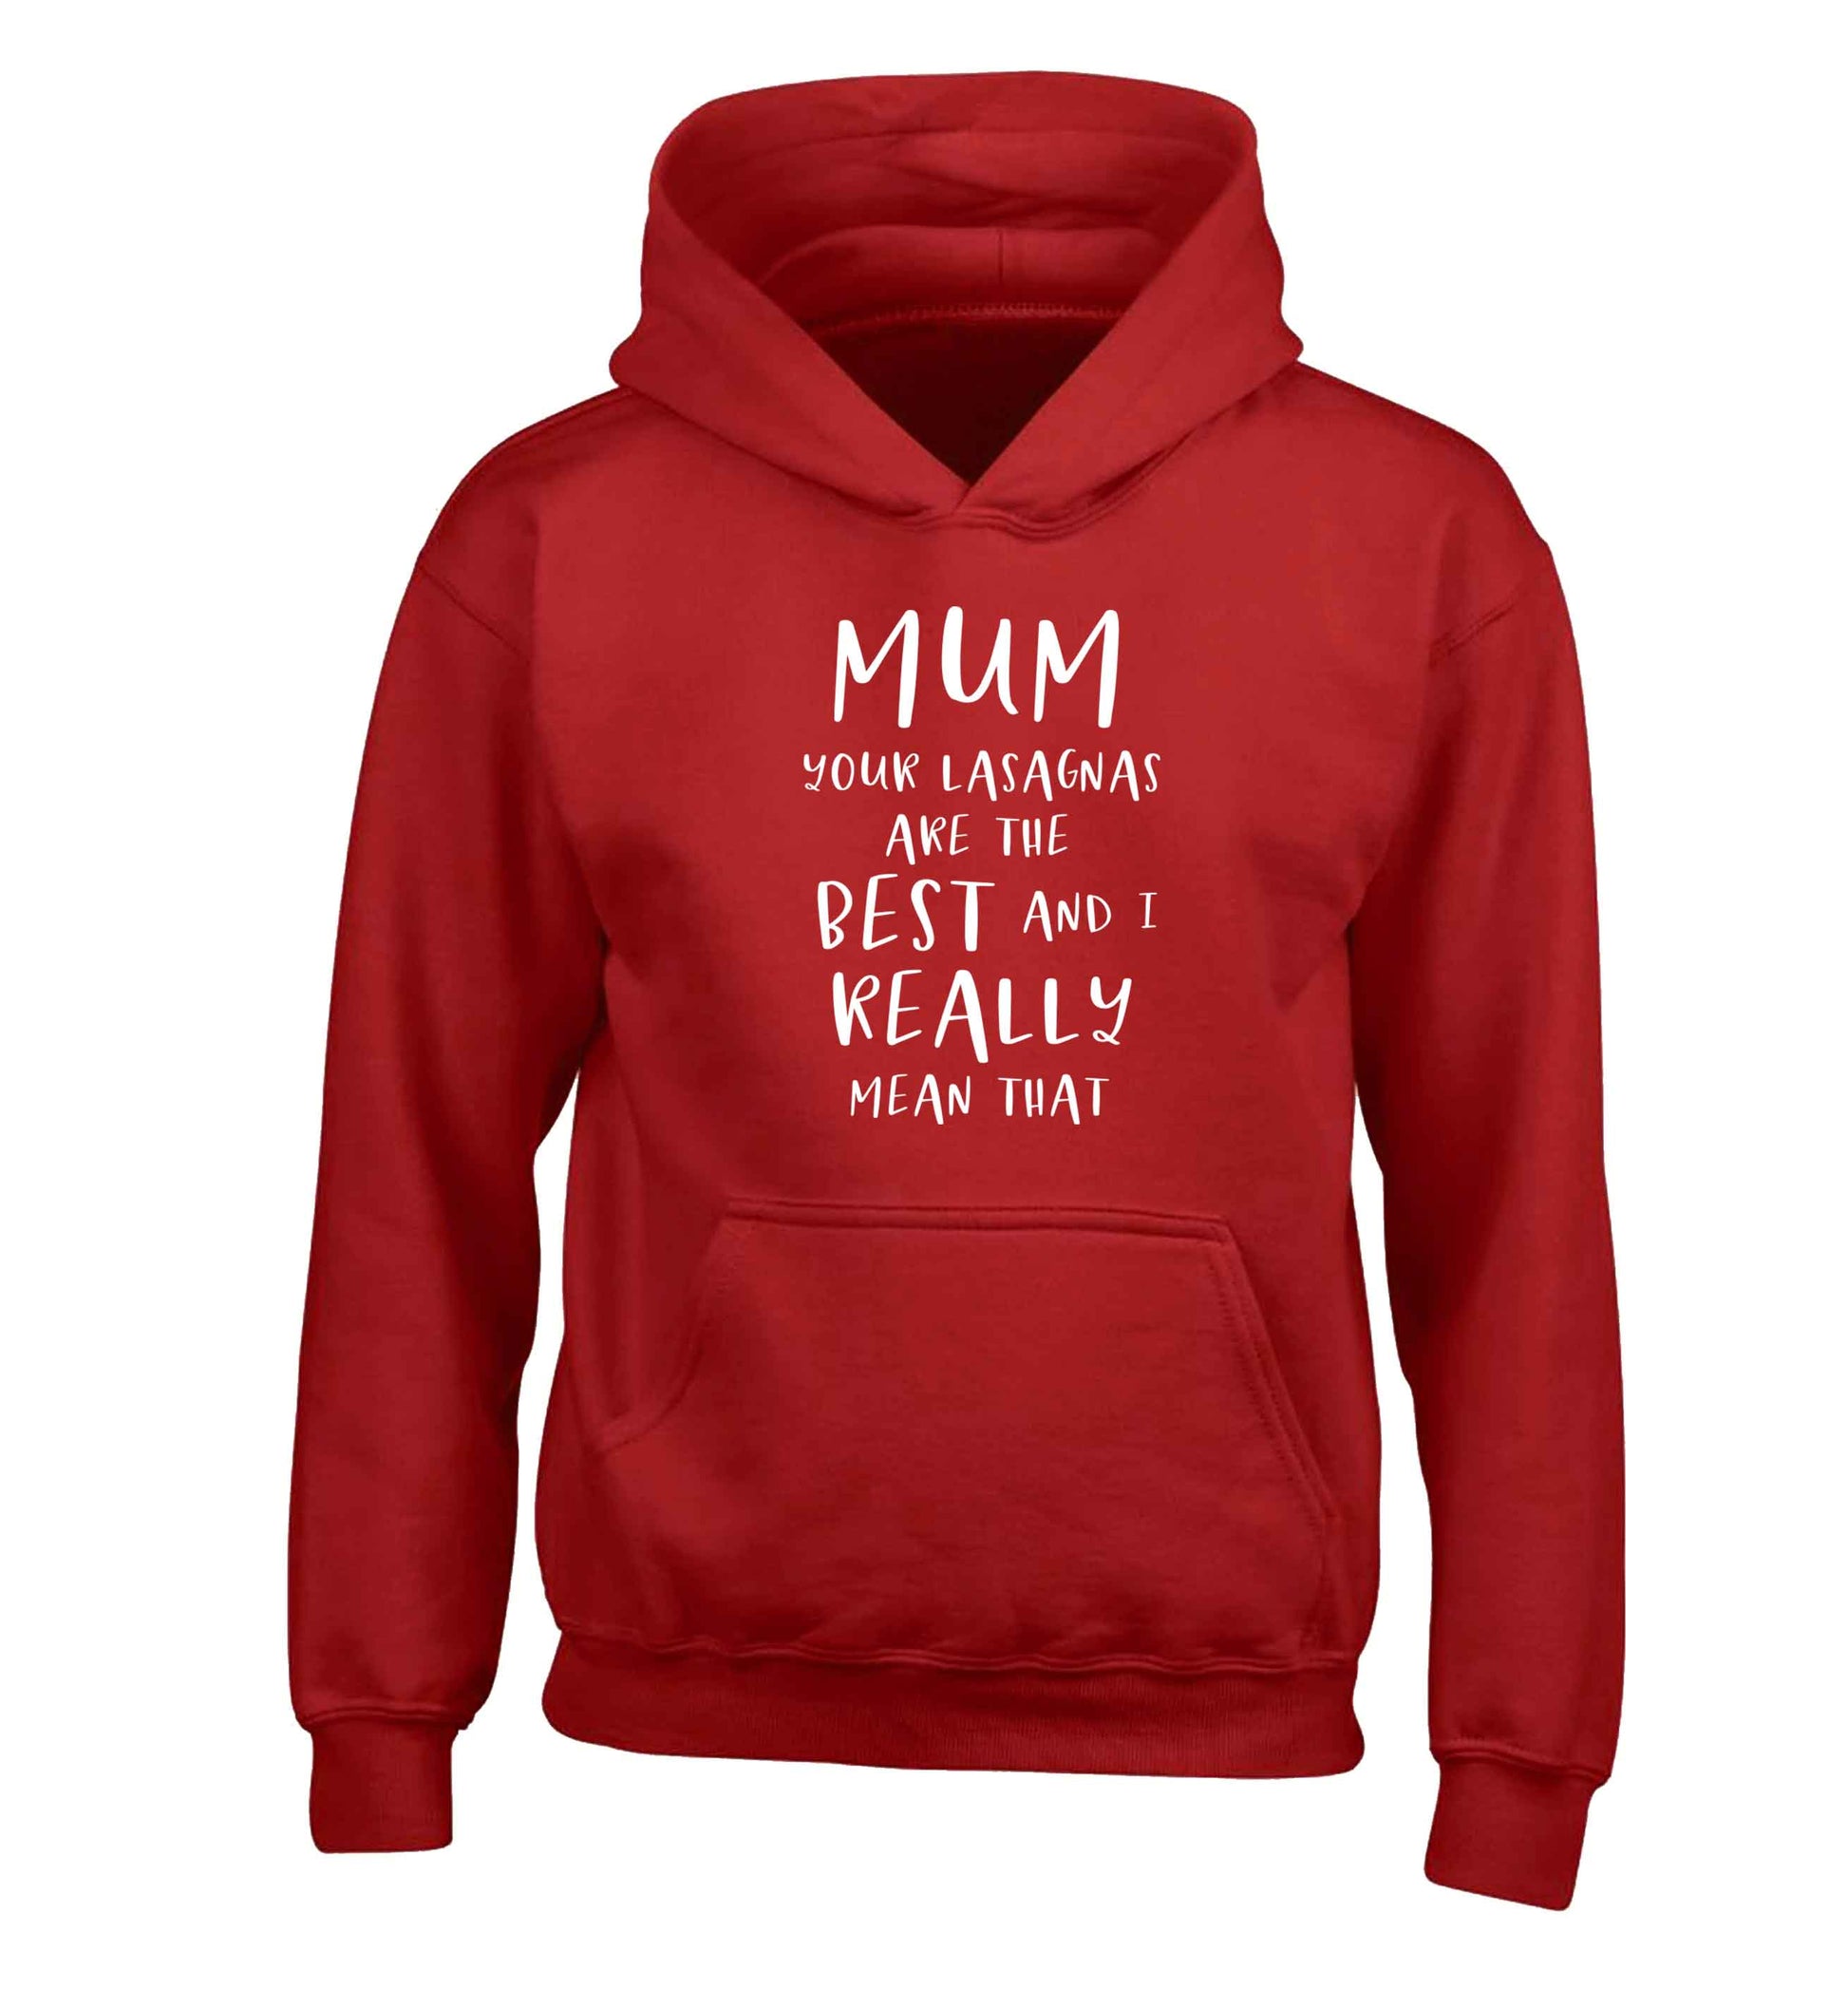 Funny gifts for your mum on mother's dayor her birthday! Mum your lasagnas are the best and I really mean that children's red hoodie 12-13 Years